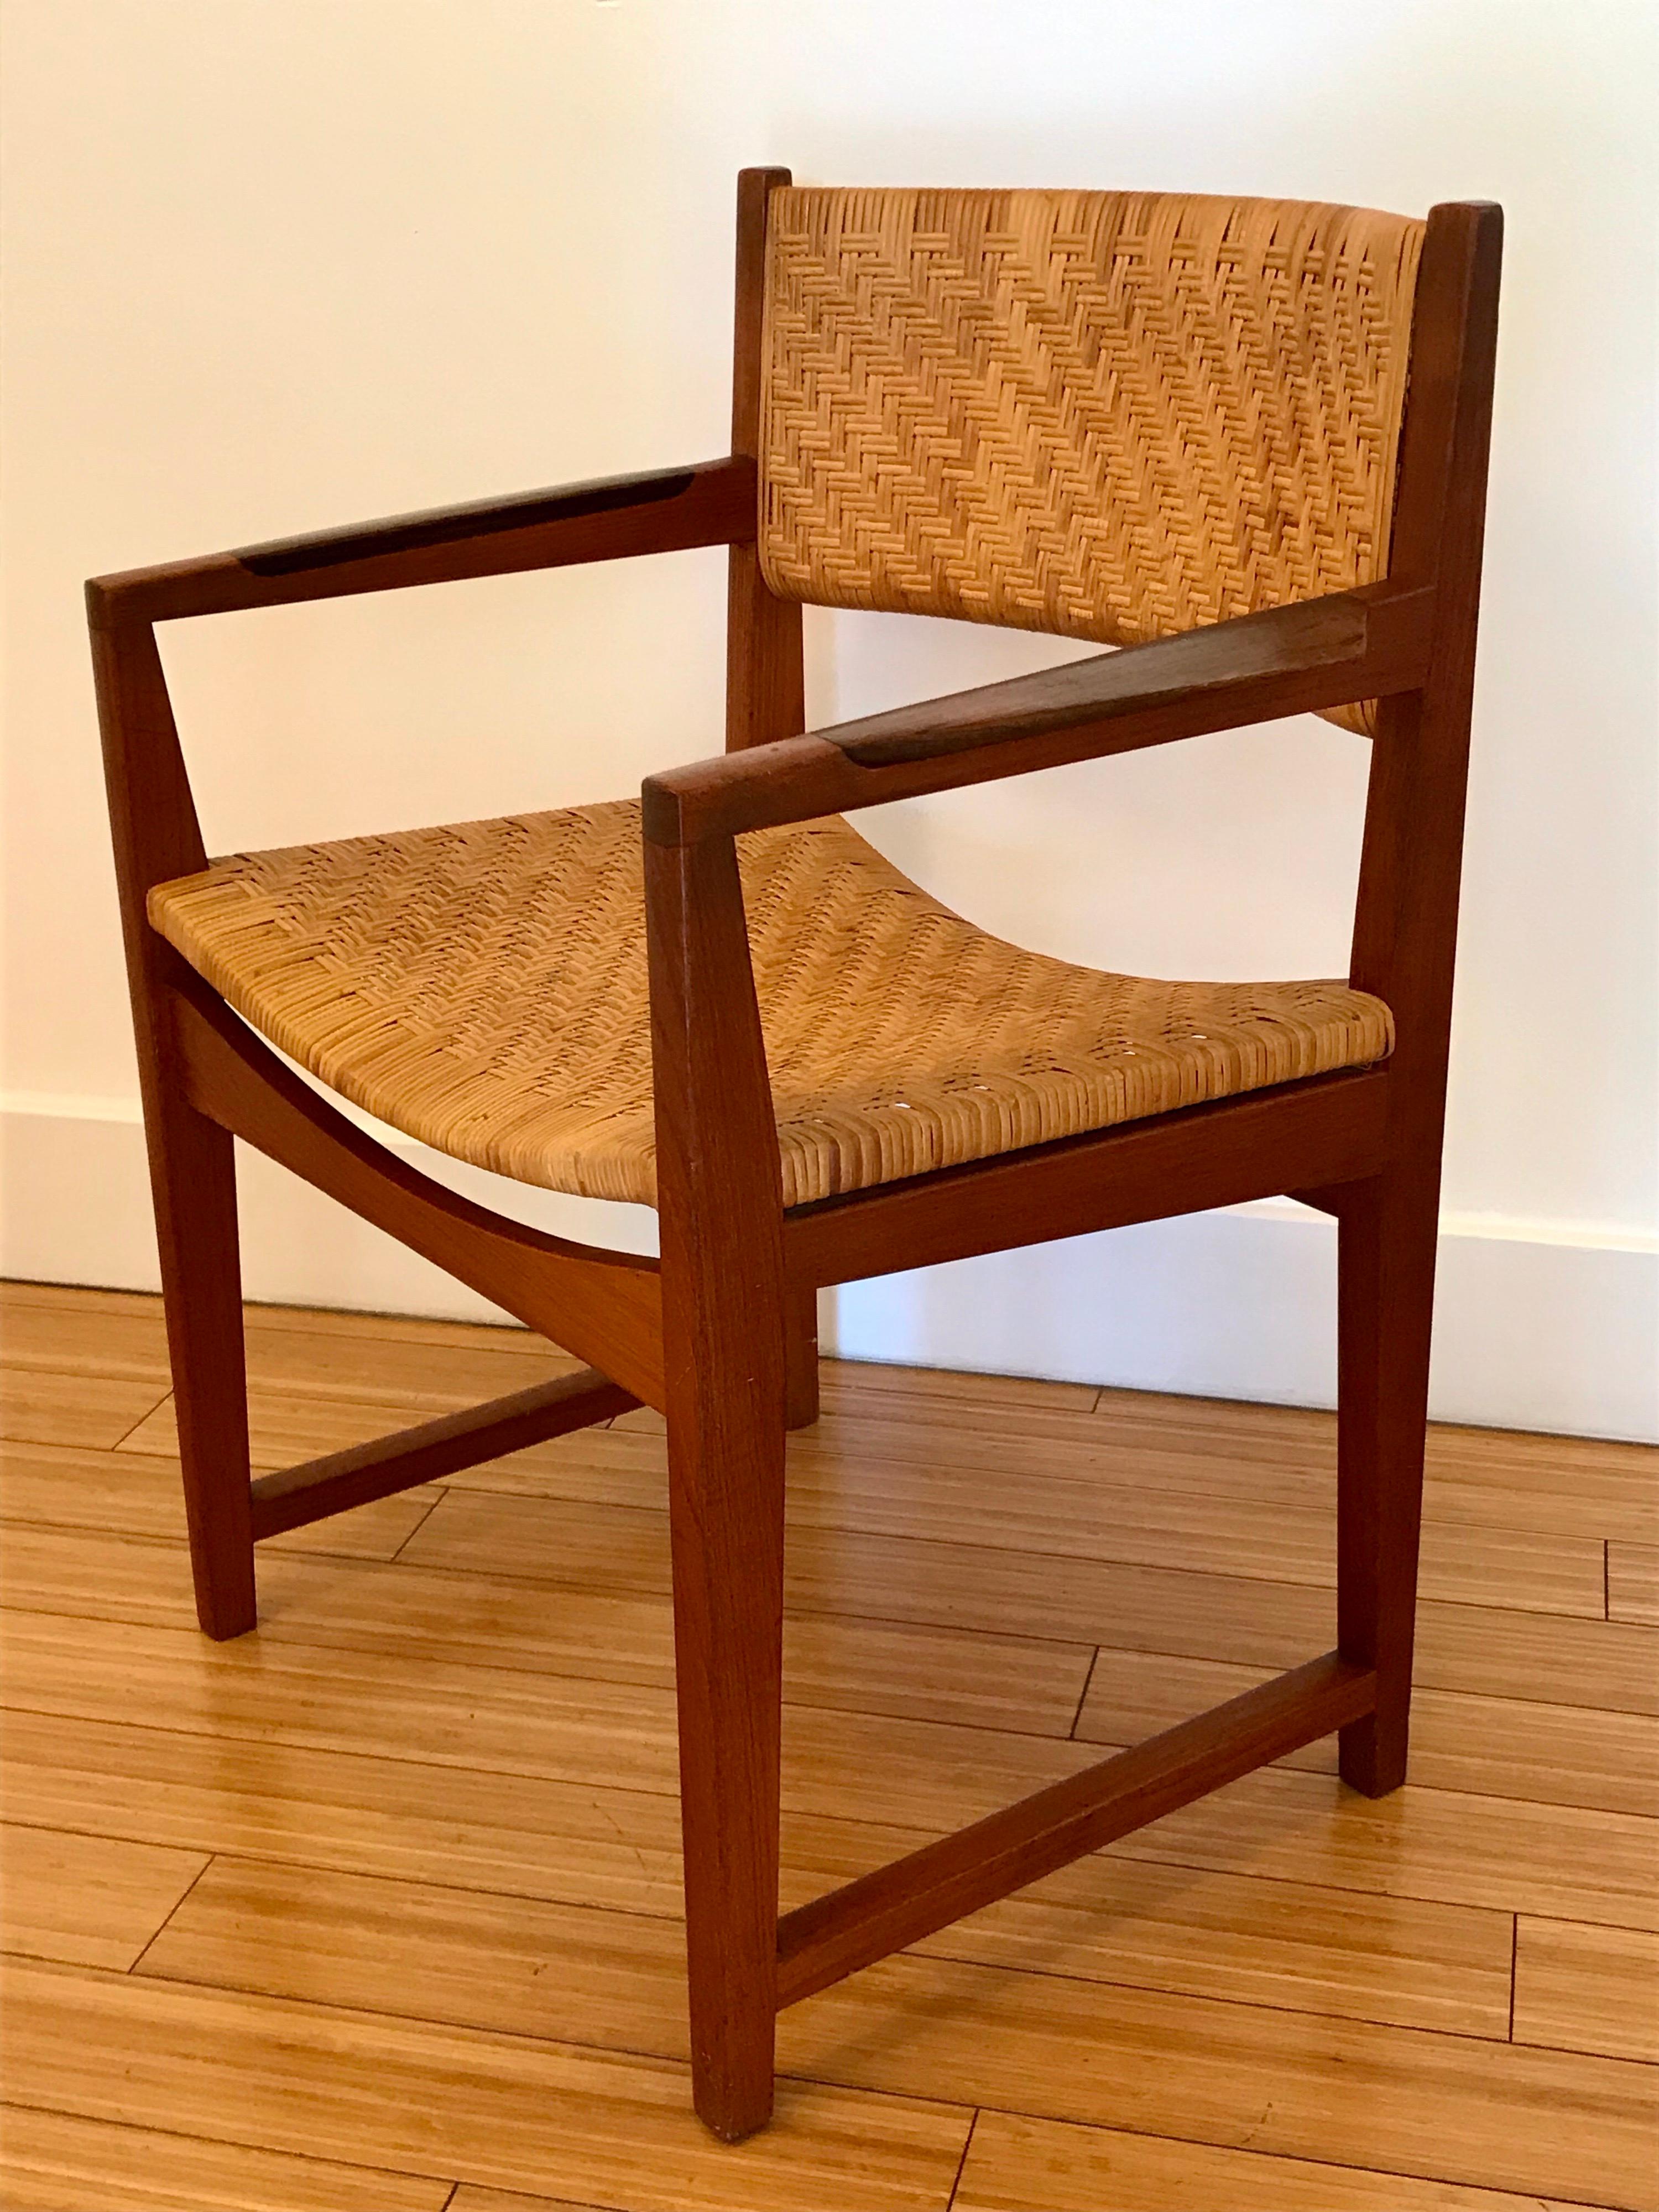 A handsome Danish modern design
solid teak wood construction 
rosewood armrest detail 
cane seat and back
comfy and stout
great for a desk or add to a dining set or use as an accent anywhere.
  